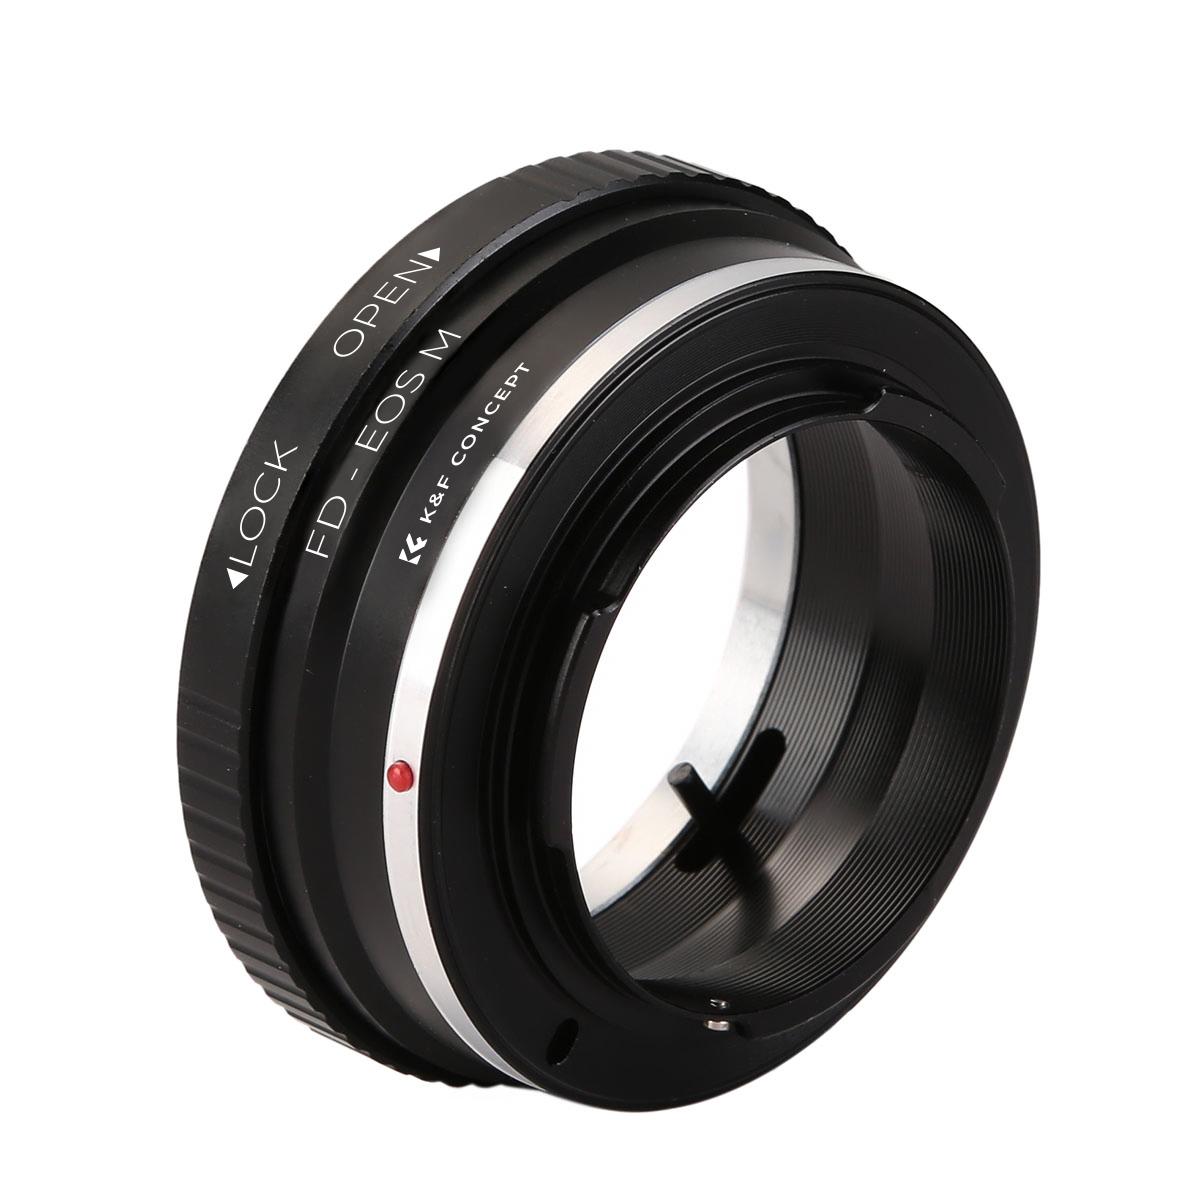 Lens Adapters Canon Fd Lens To Canon Eos M Camera Mount Adapter Kandf Concept